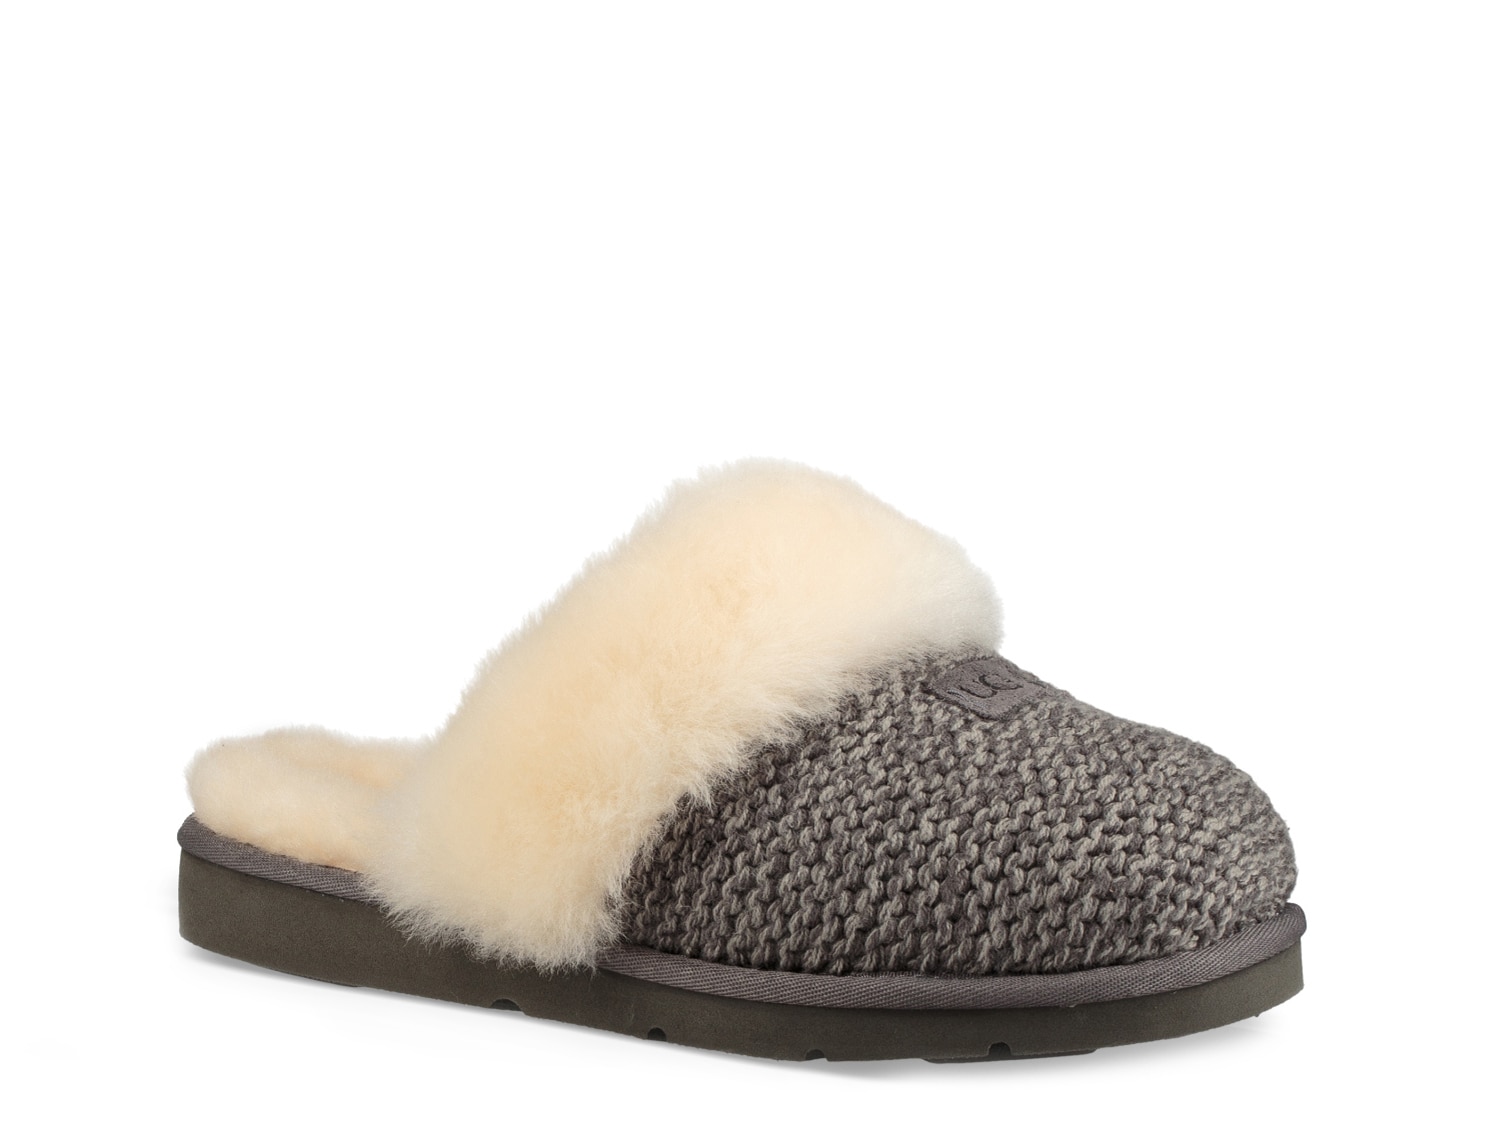 ugg slippers sale size 4 Cheaper Than 